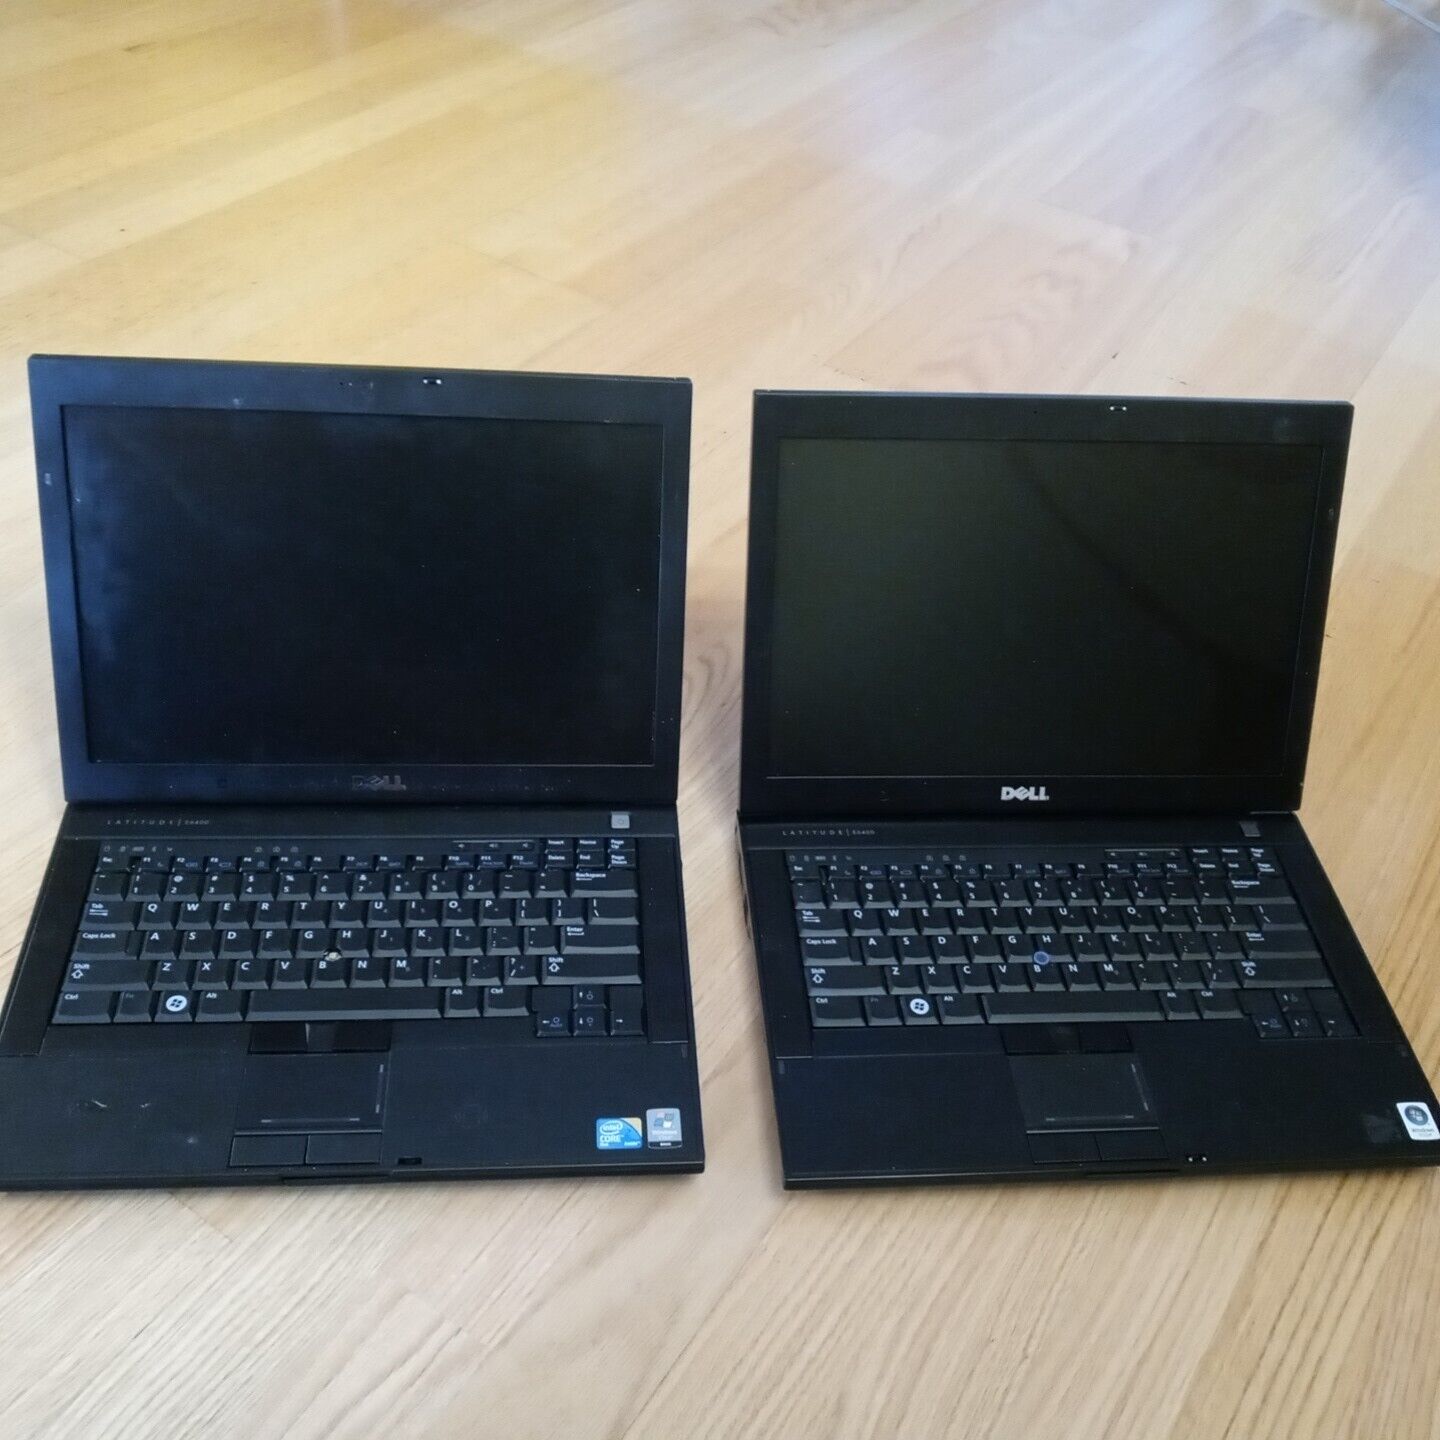 Dell Latitude E6400 Laptop (Lot of 2) for Parts or repair